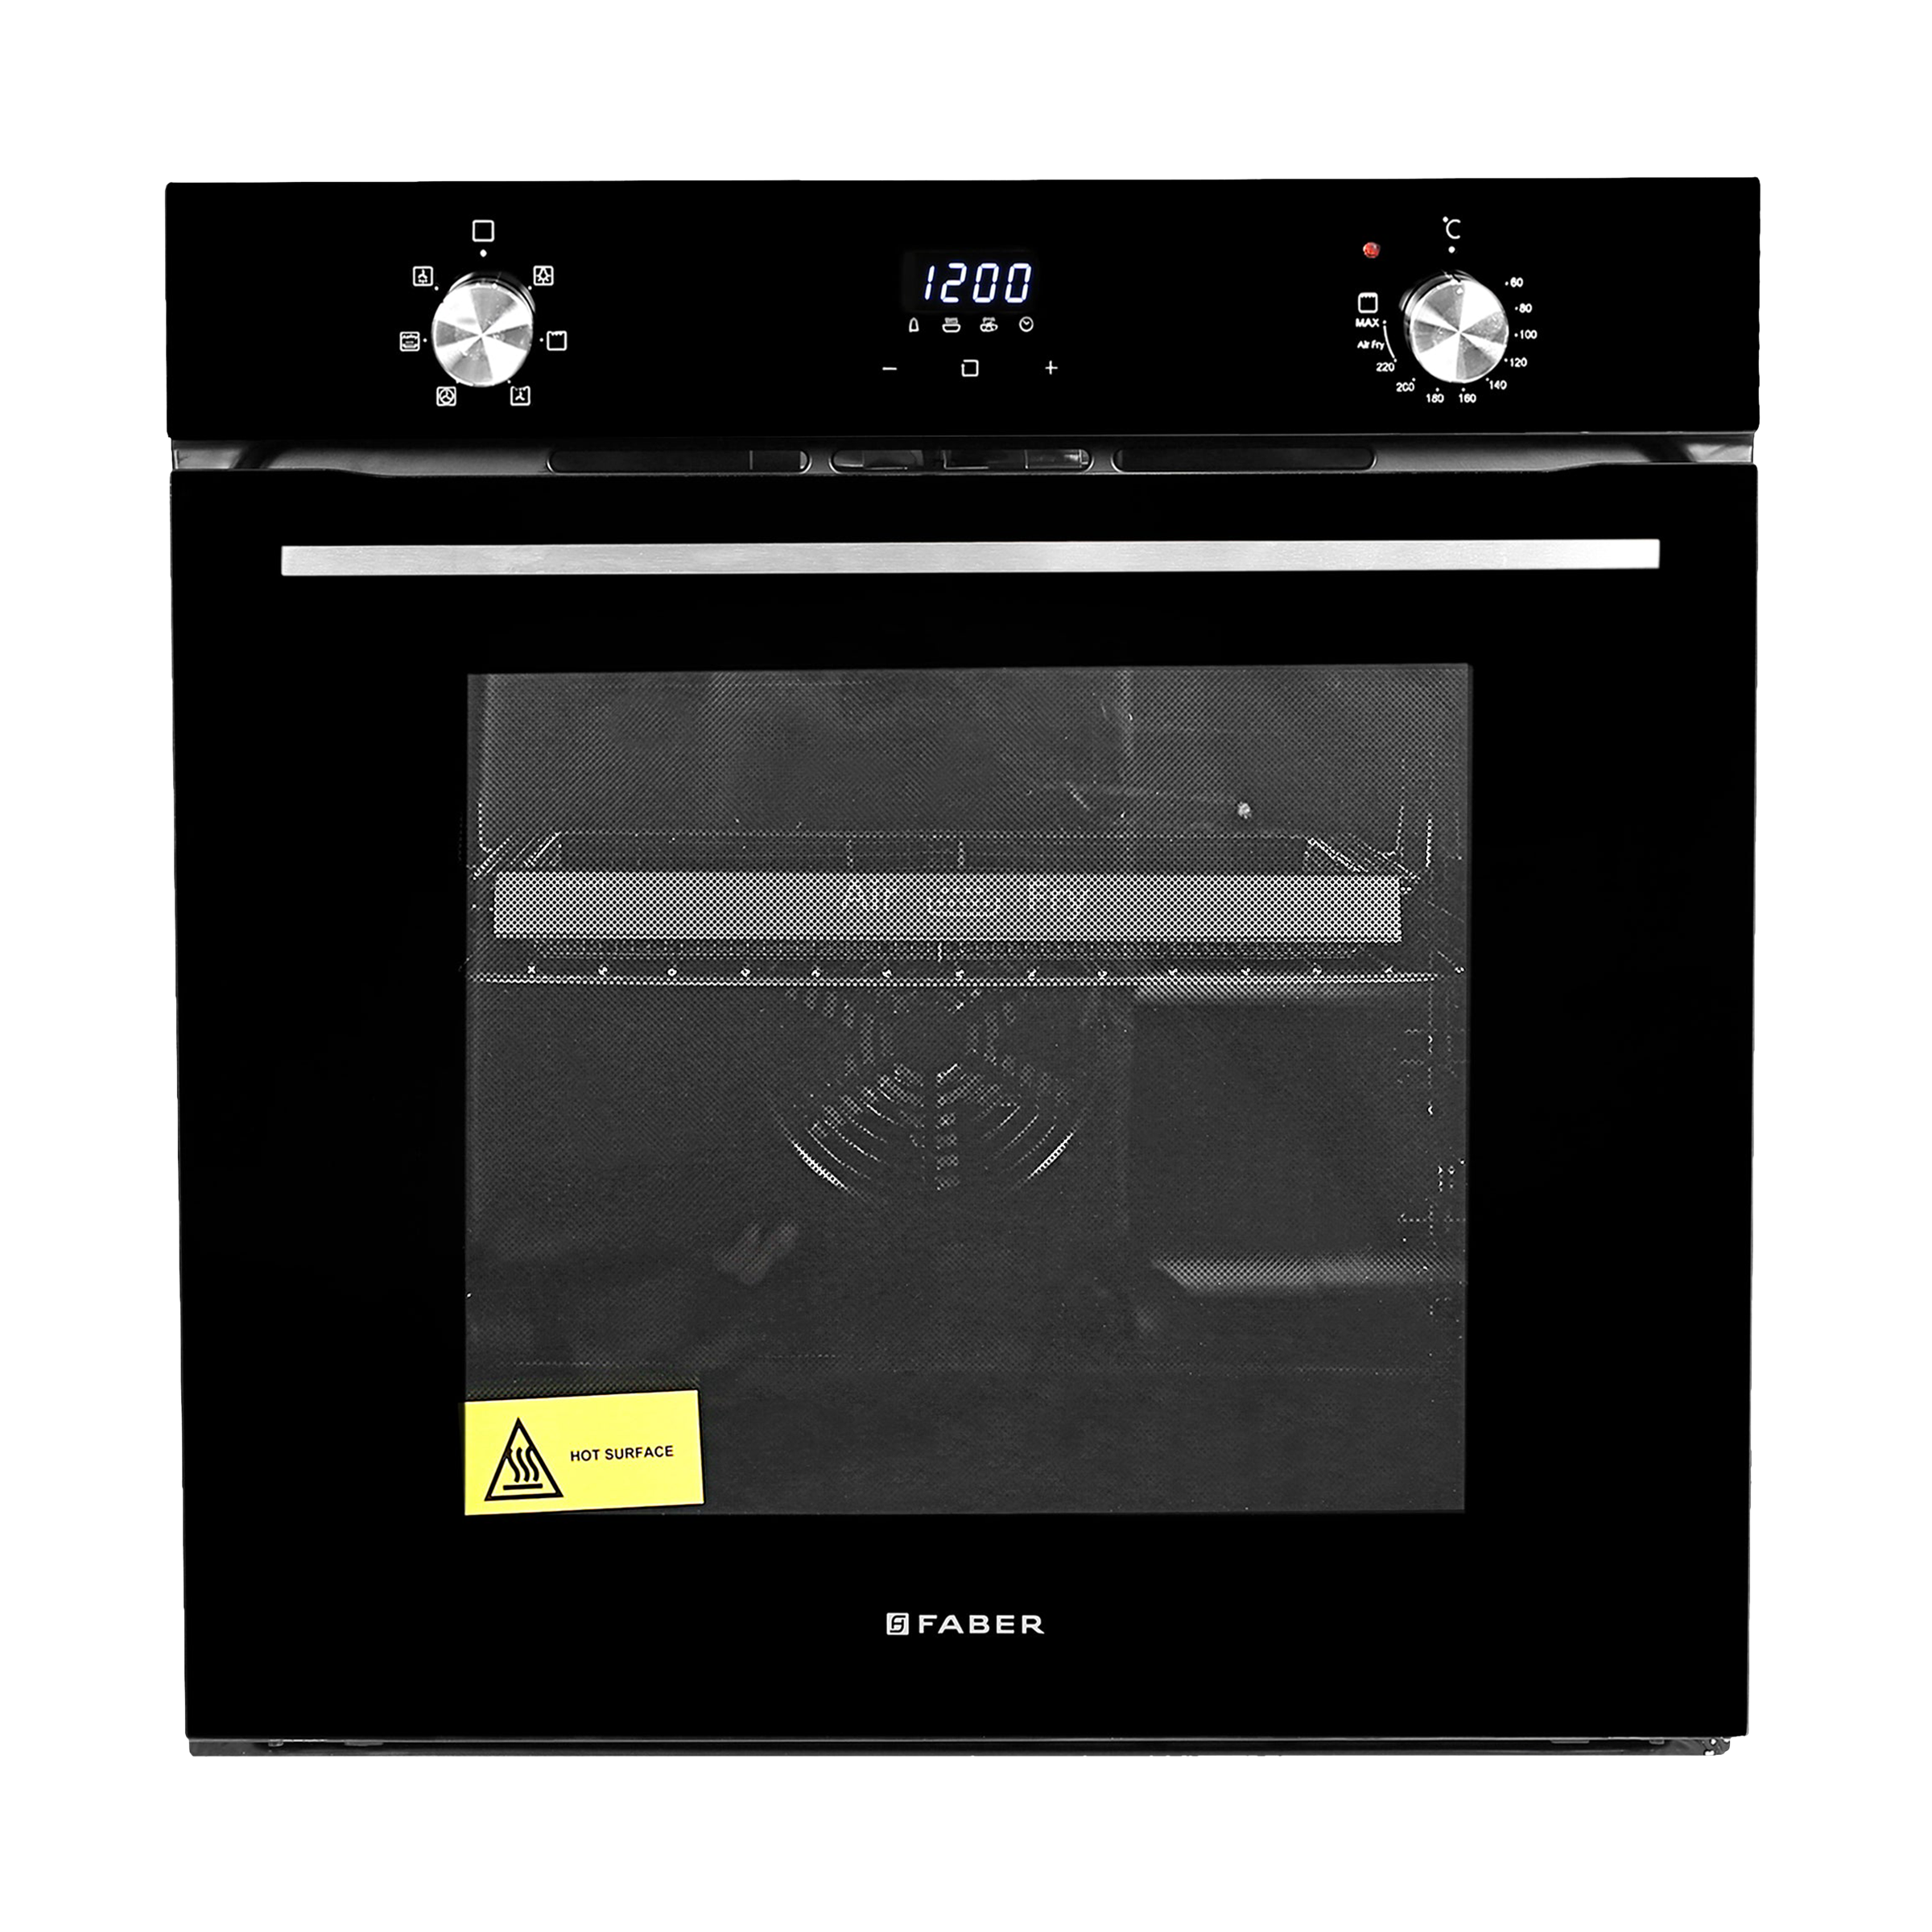 Faber FBIO 83 Litres Built-in Microwave Oven (Hot Air Technology, 131.0651.880, Black)_1